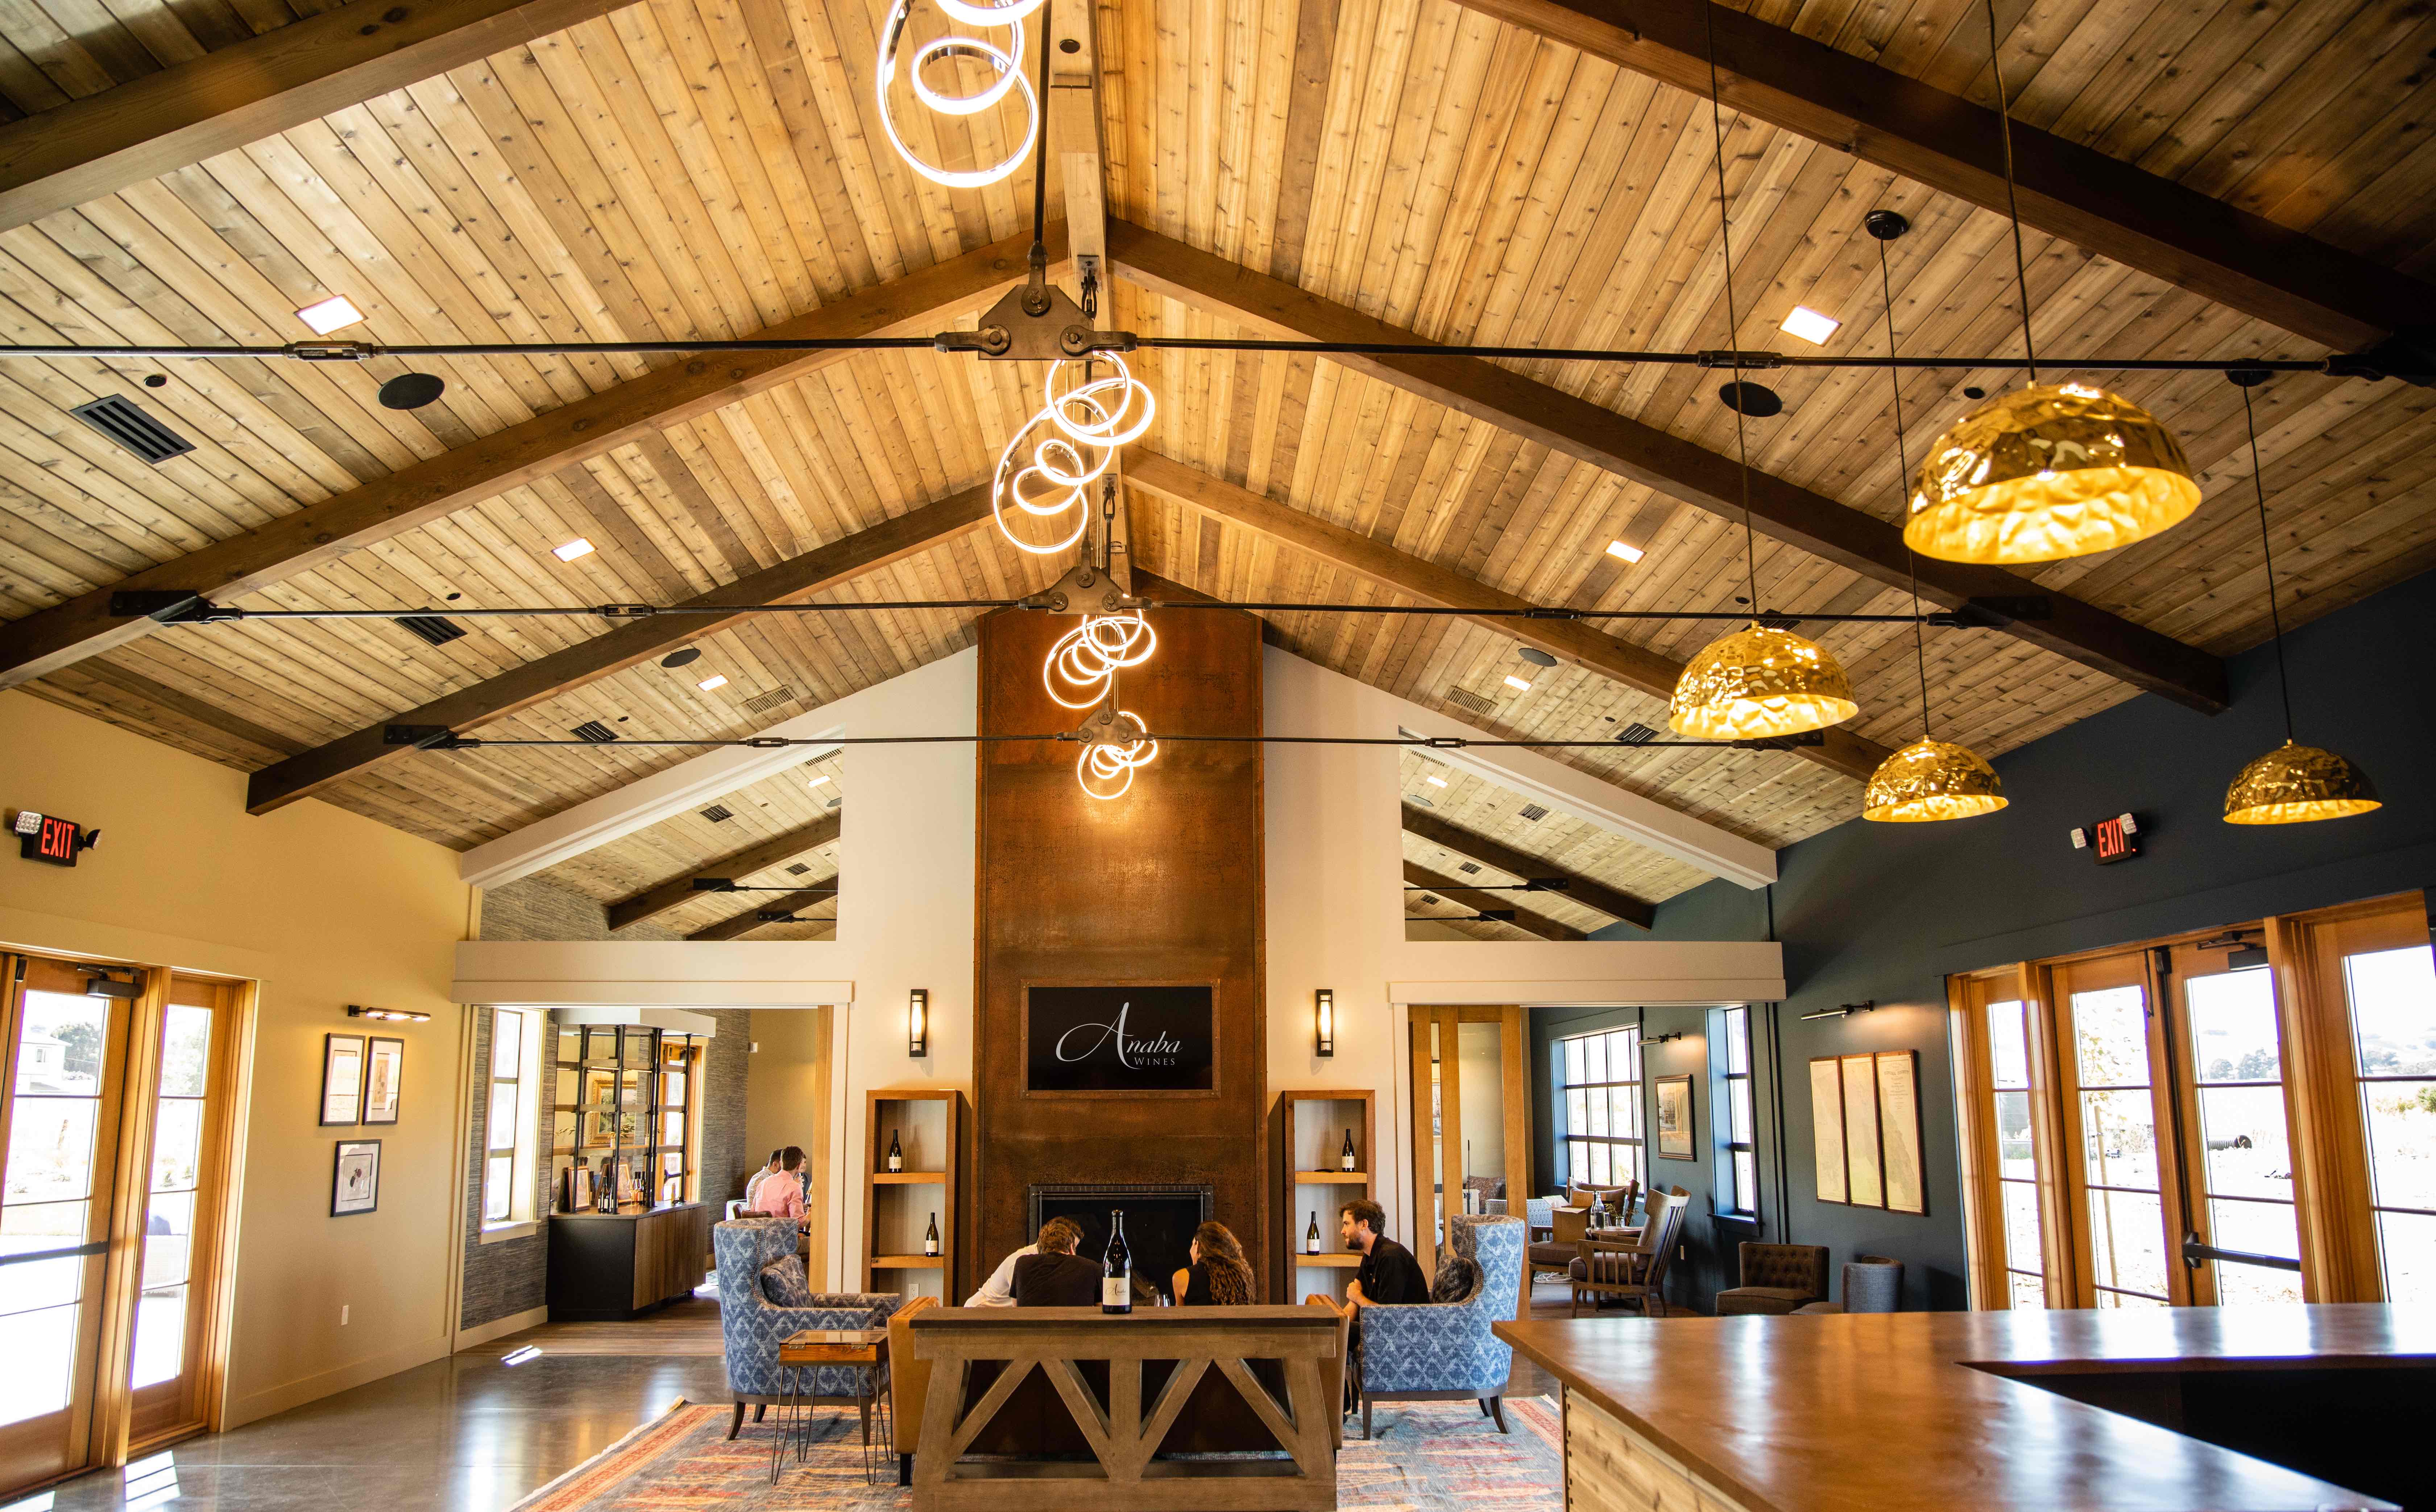 The thoughtful space includes a long communal table and bar for casual tastings, as well as a light-filled room with cozy, intimate seating areas for in-depth wine education.